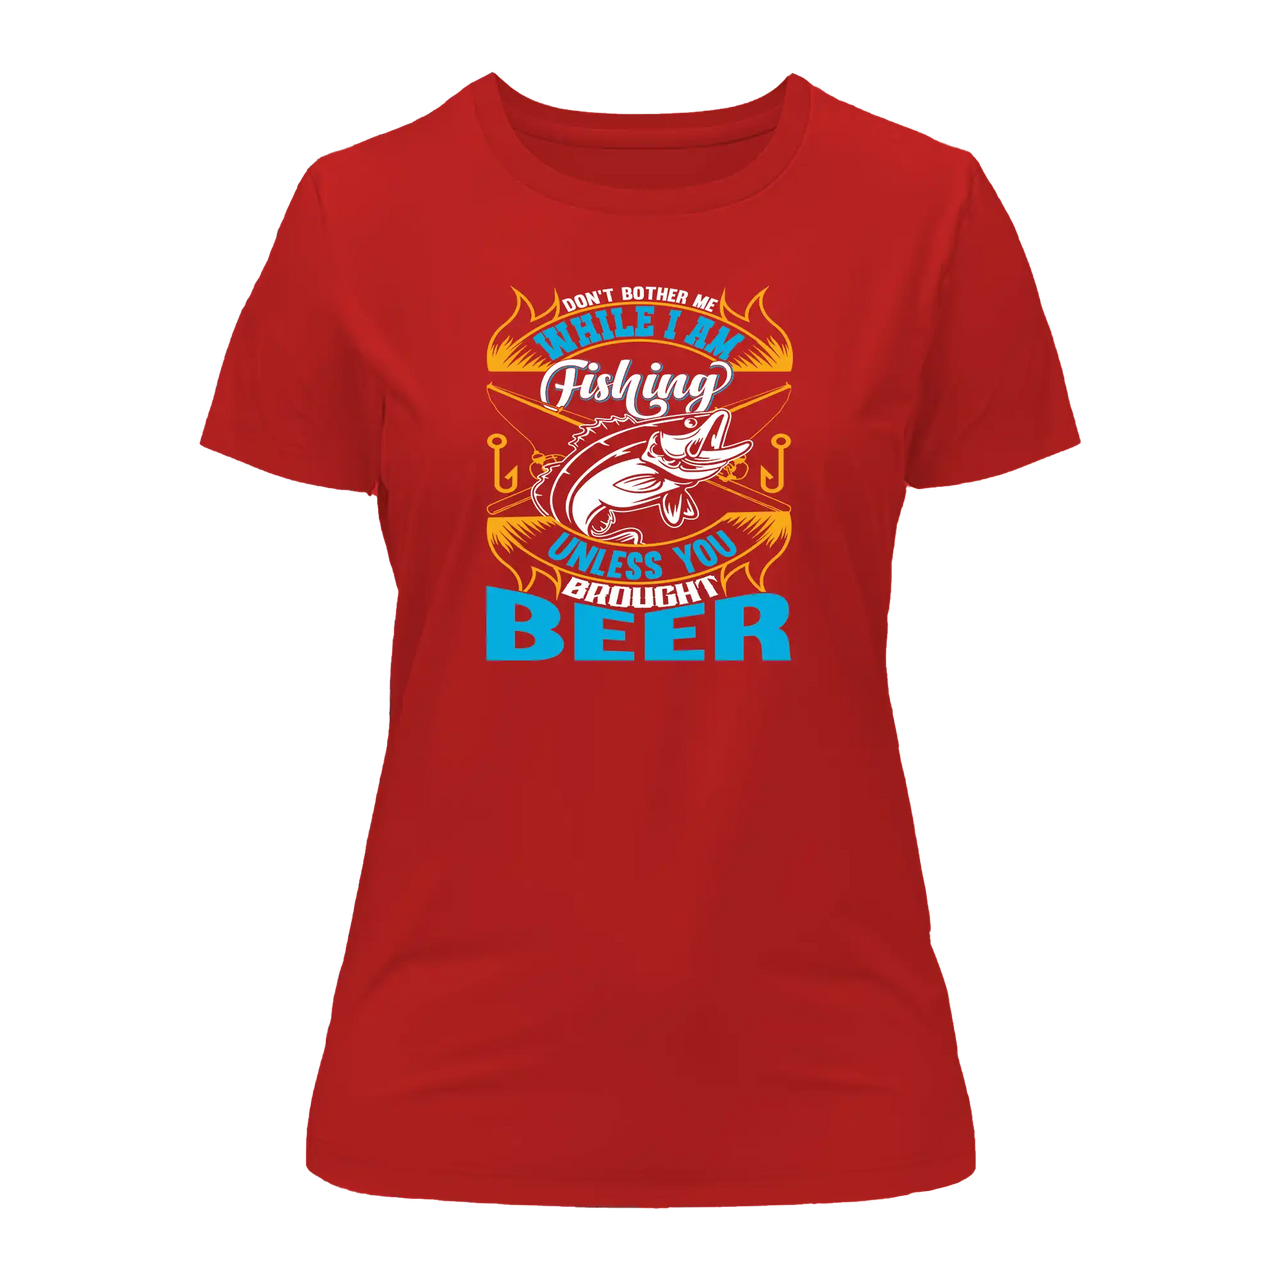 Don't Bother Me While I'm Fishing T-Shirt for Women